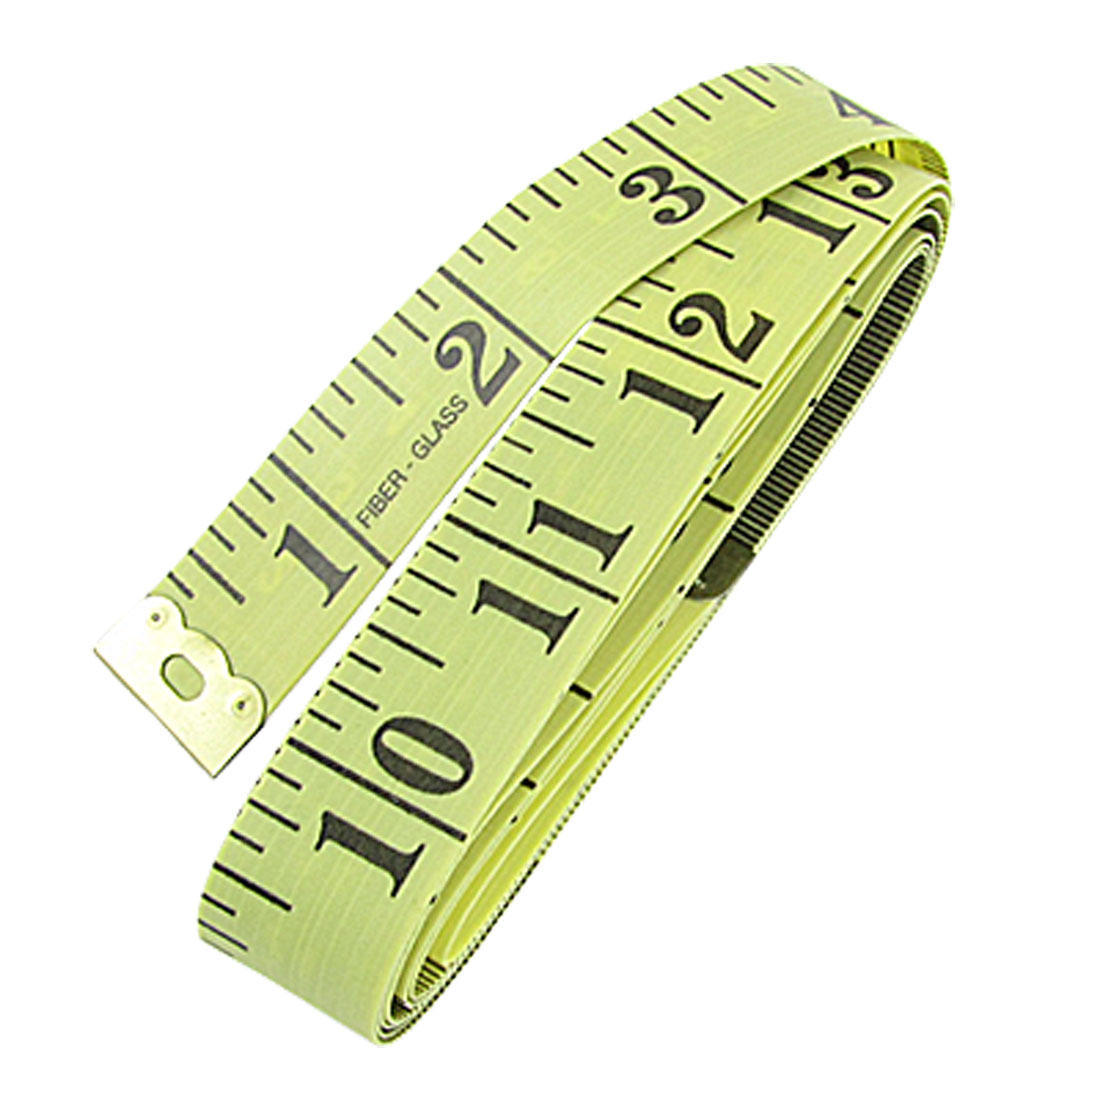 Picture Of A Tape Measure 